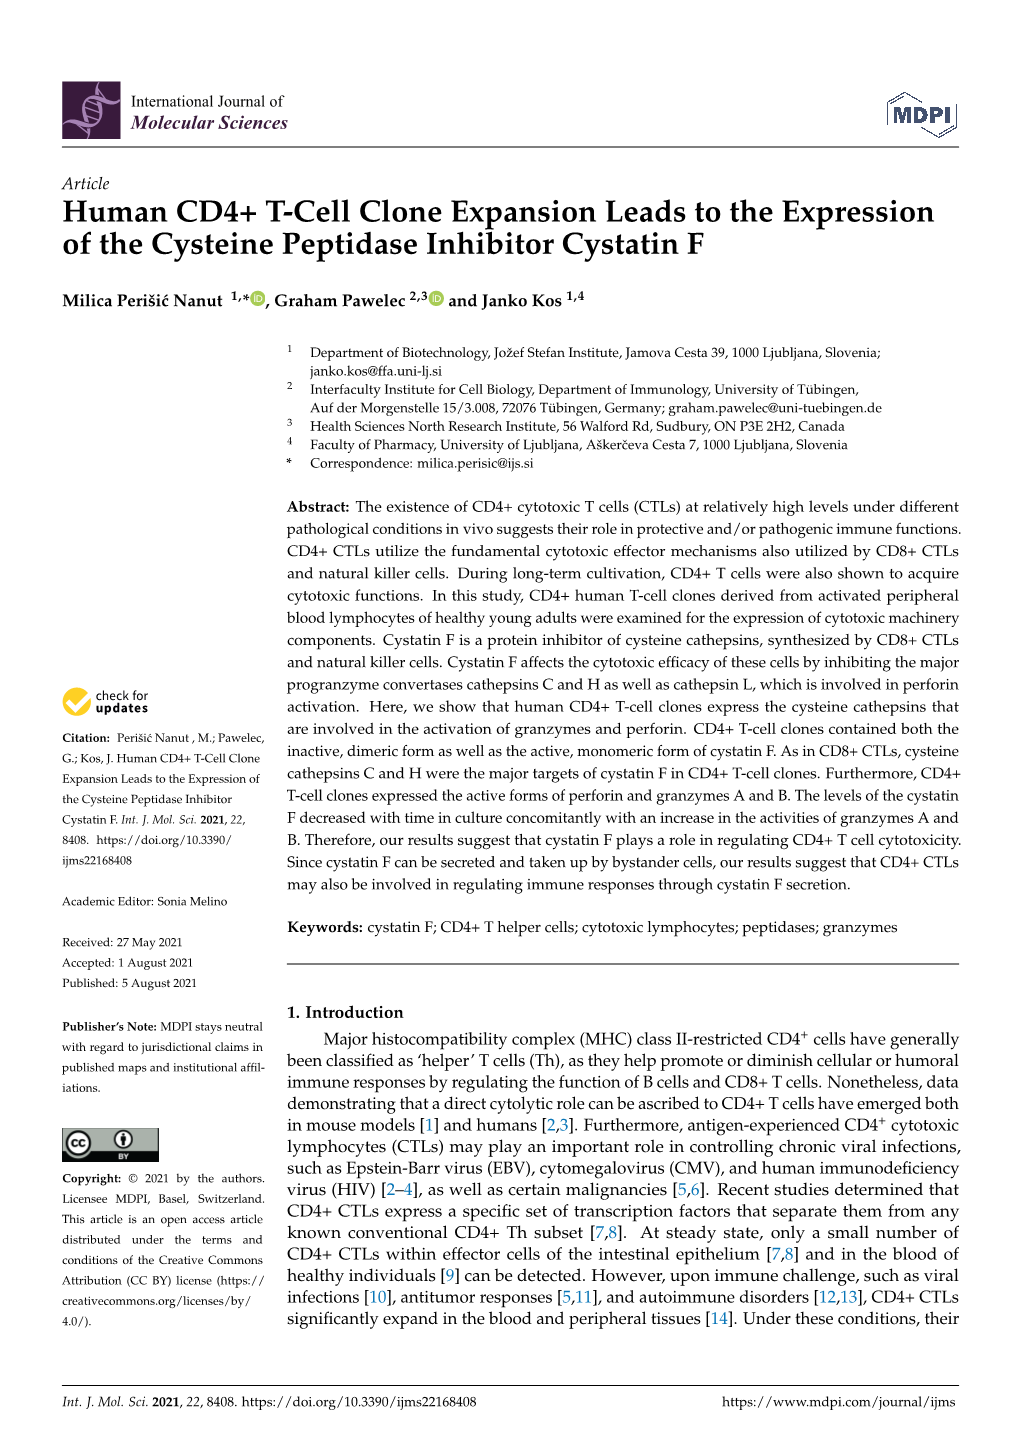 Human CD4+ T-Cell Clone Expansion Leads to the Expression of the Cysteine Peptidase Inhibitor Cystatin F